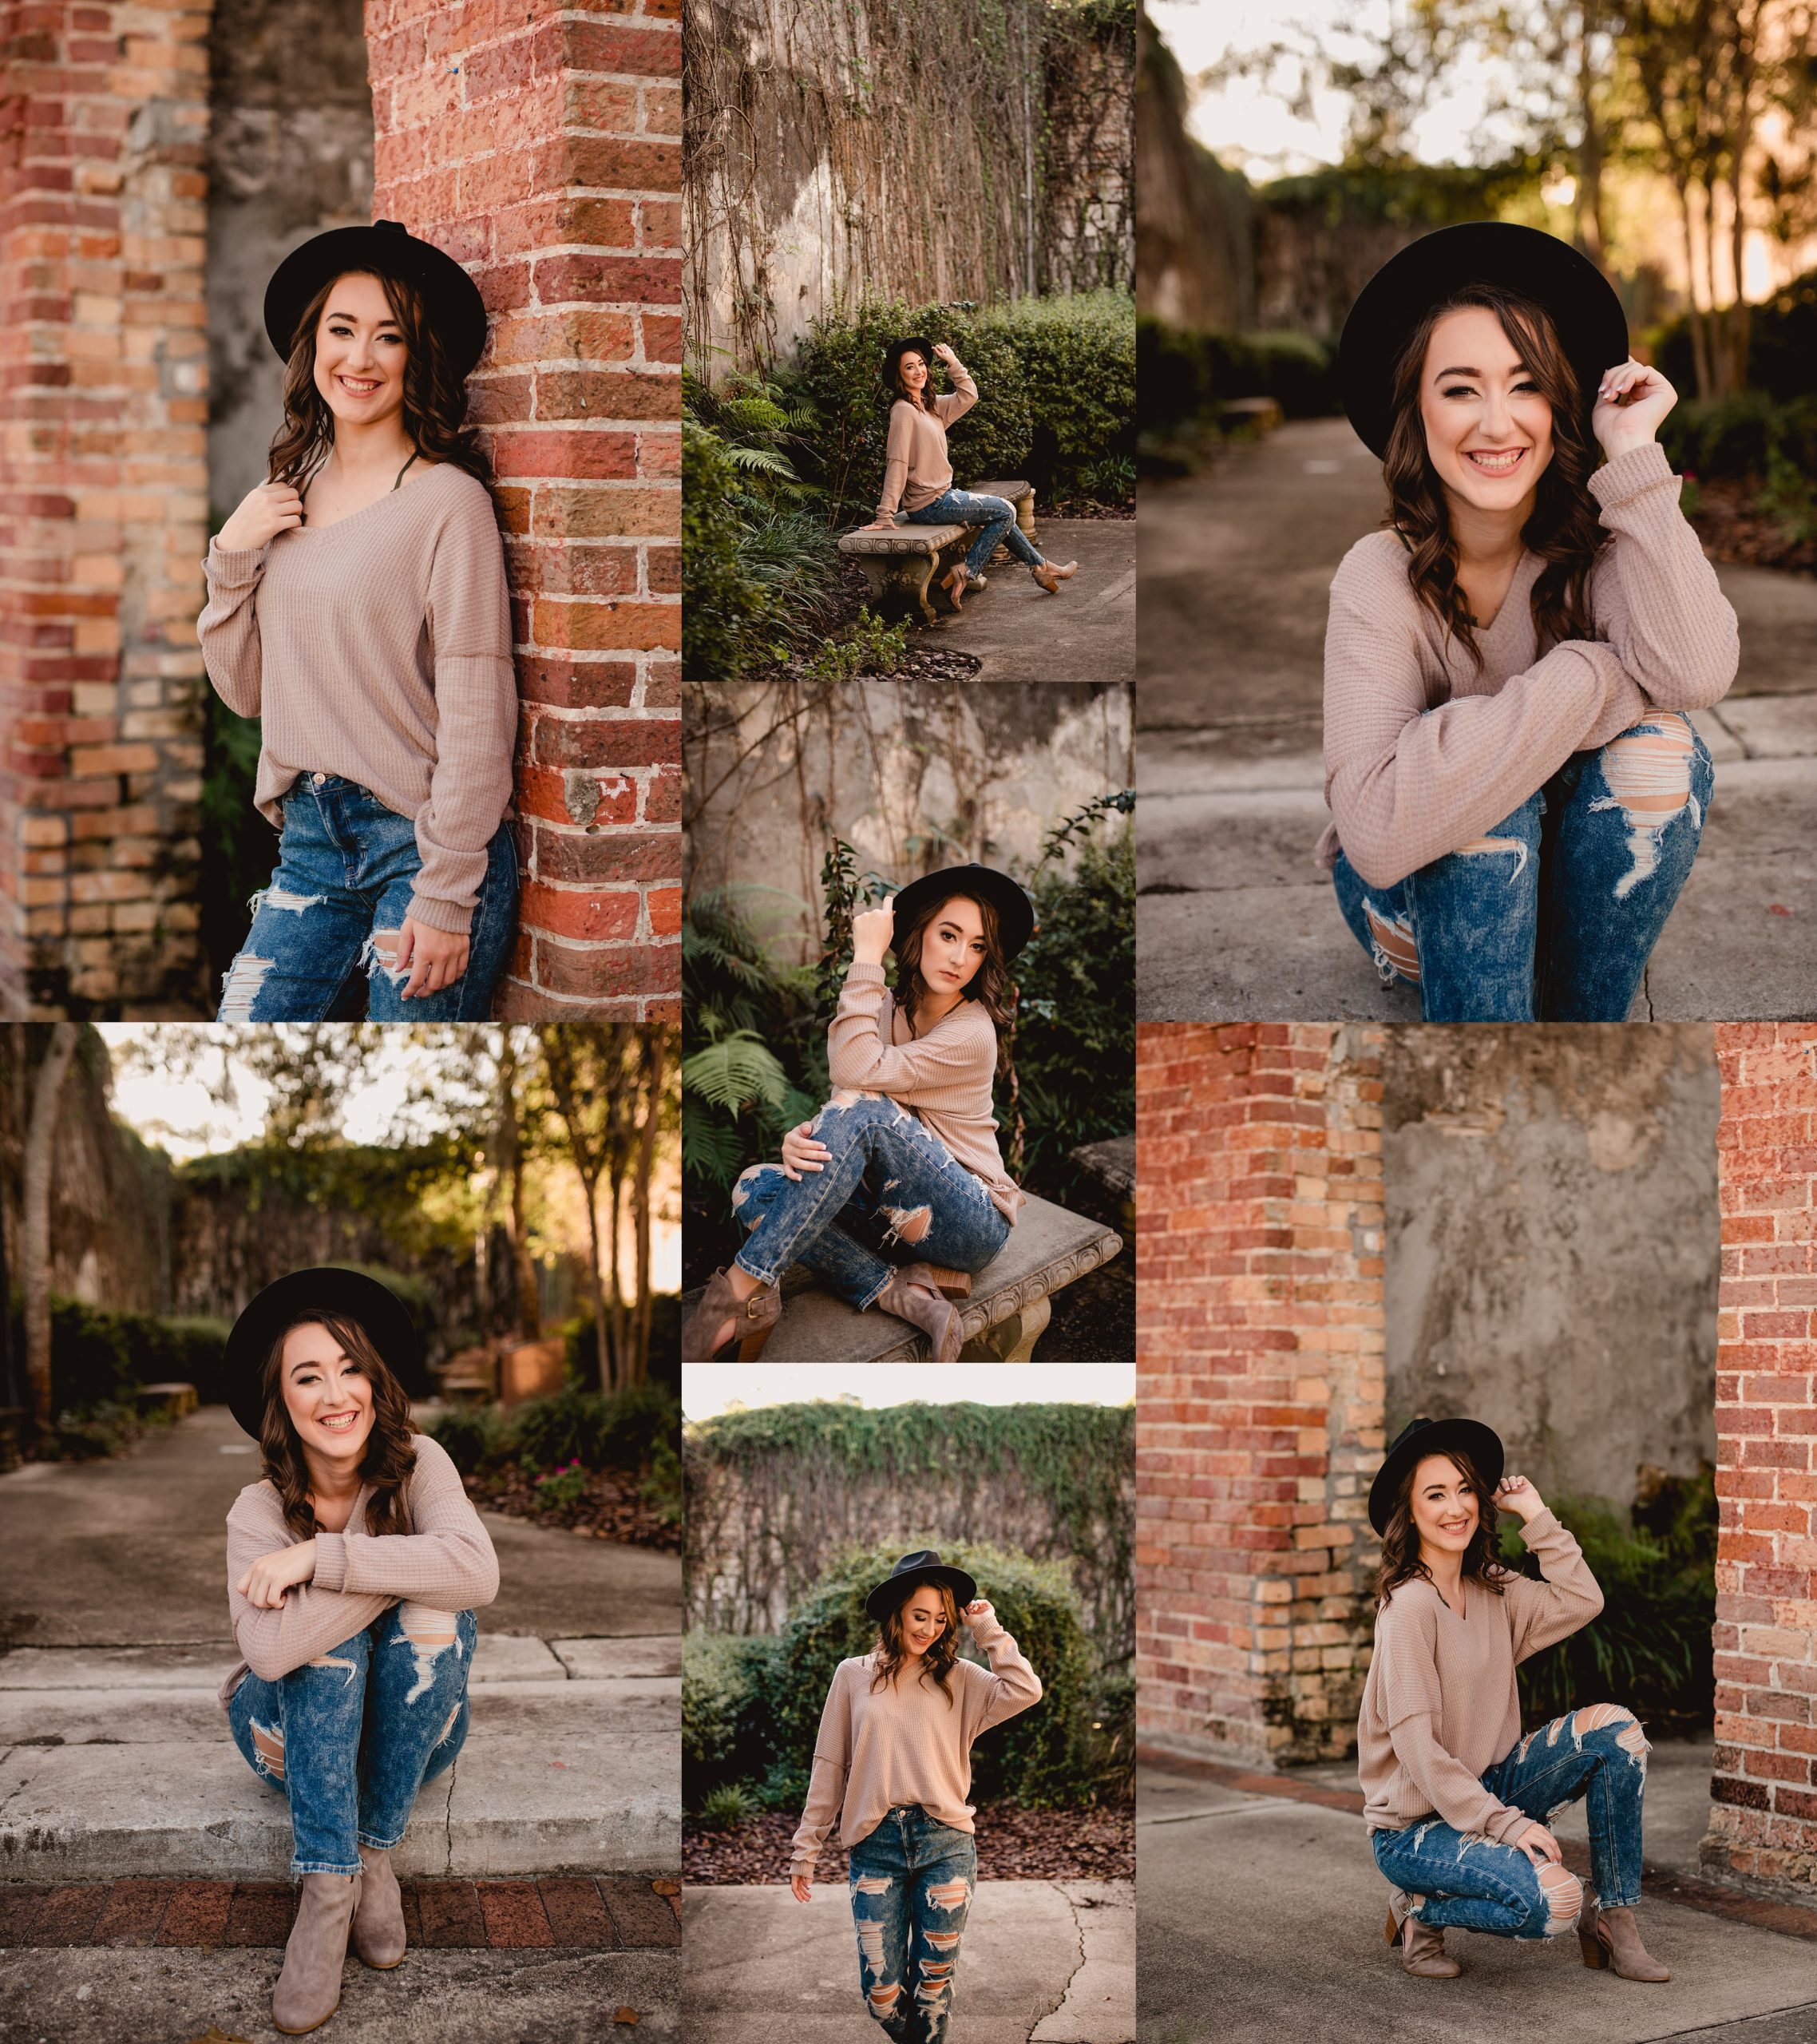 Rustic downtown Alachua Florida is the perfect place for senior pictures.